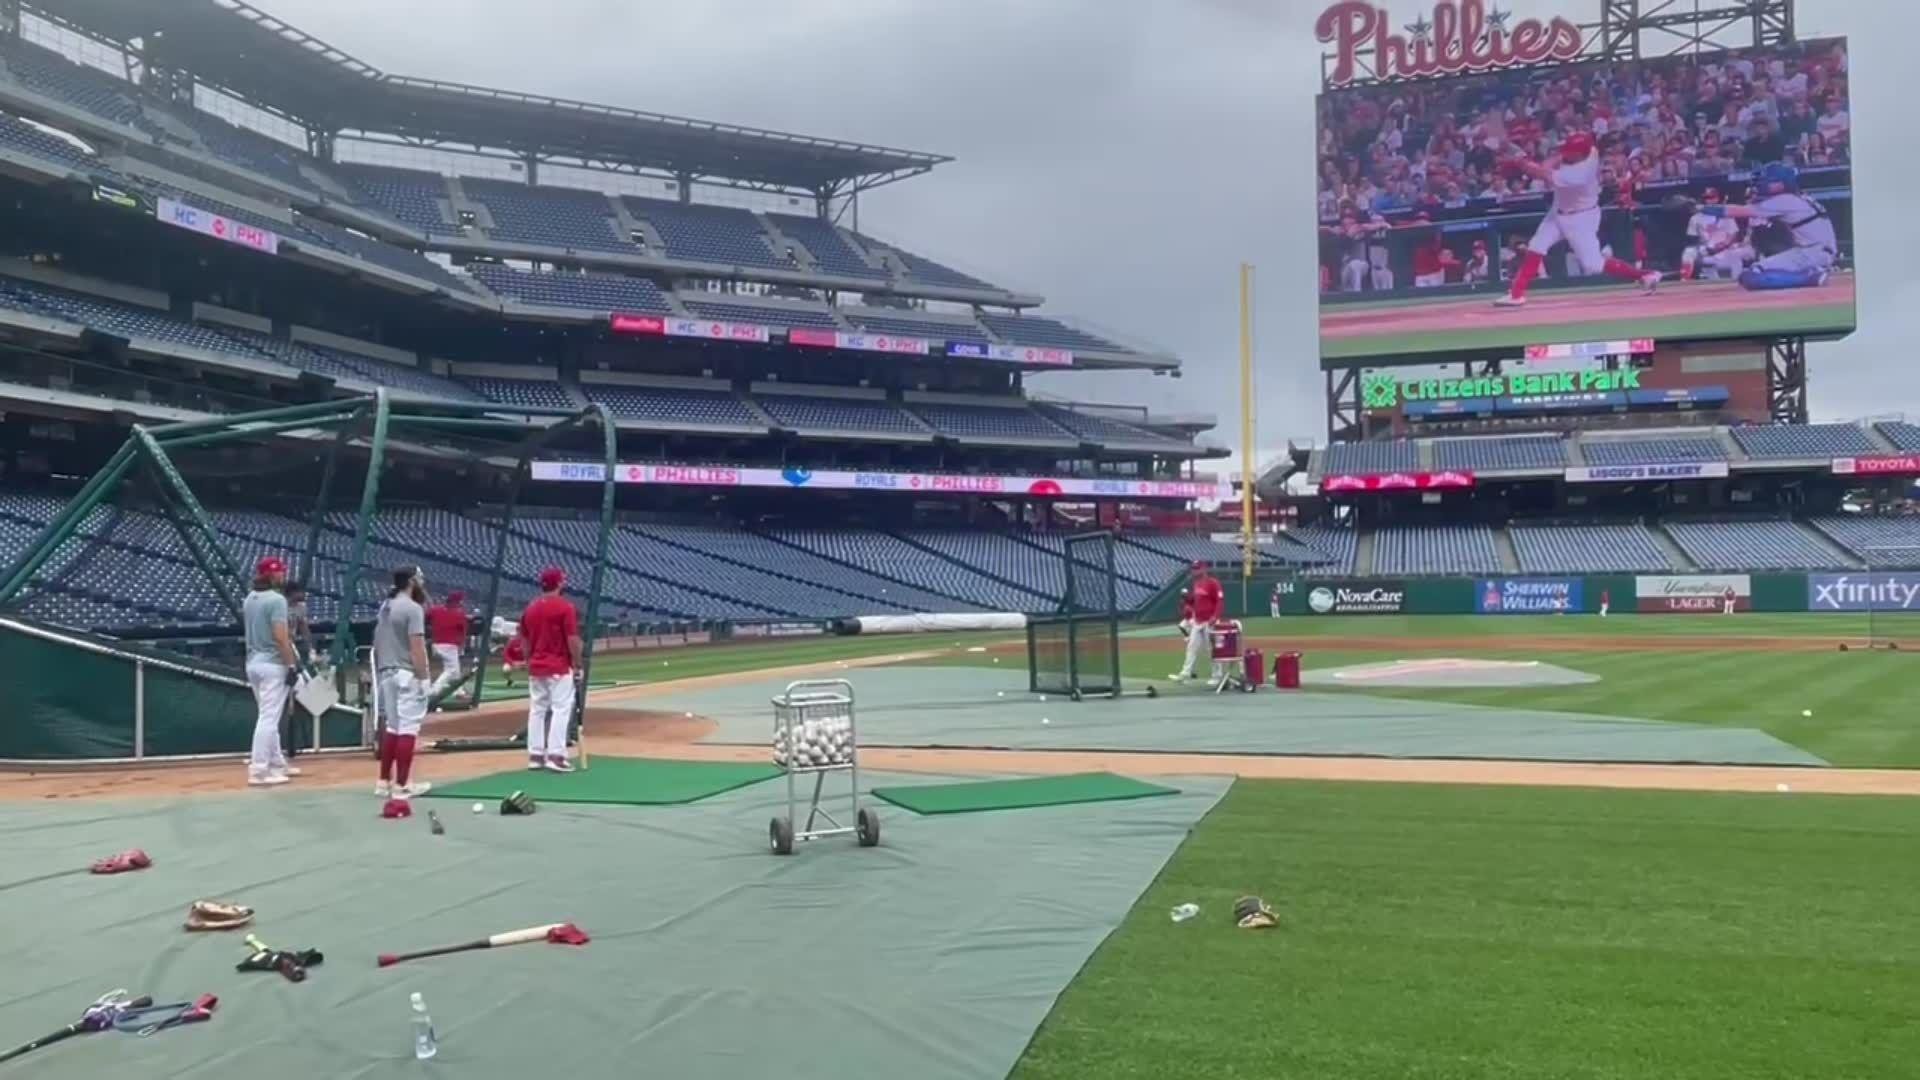 Brandon Marsh injury update: Phillies outfielder expected to miss